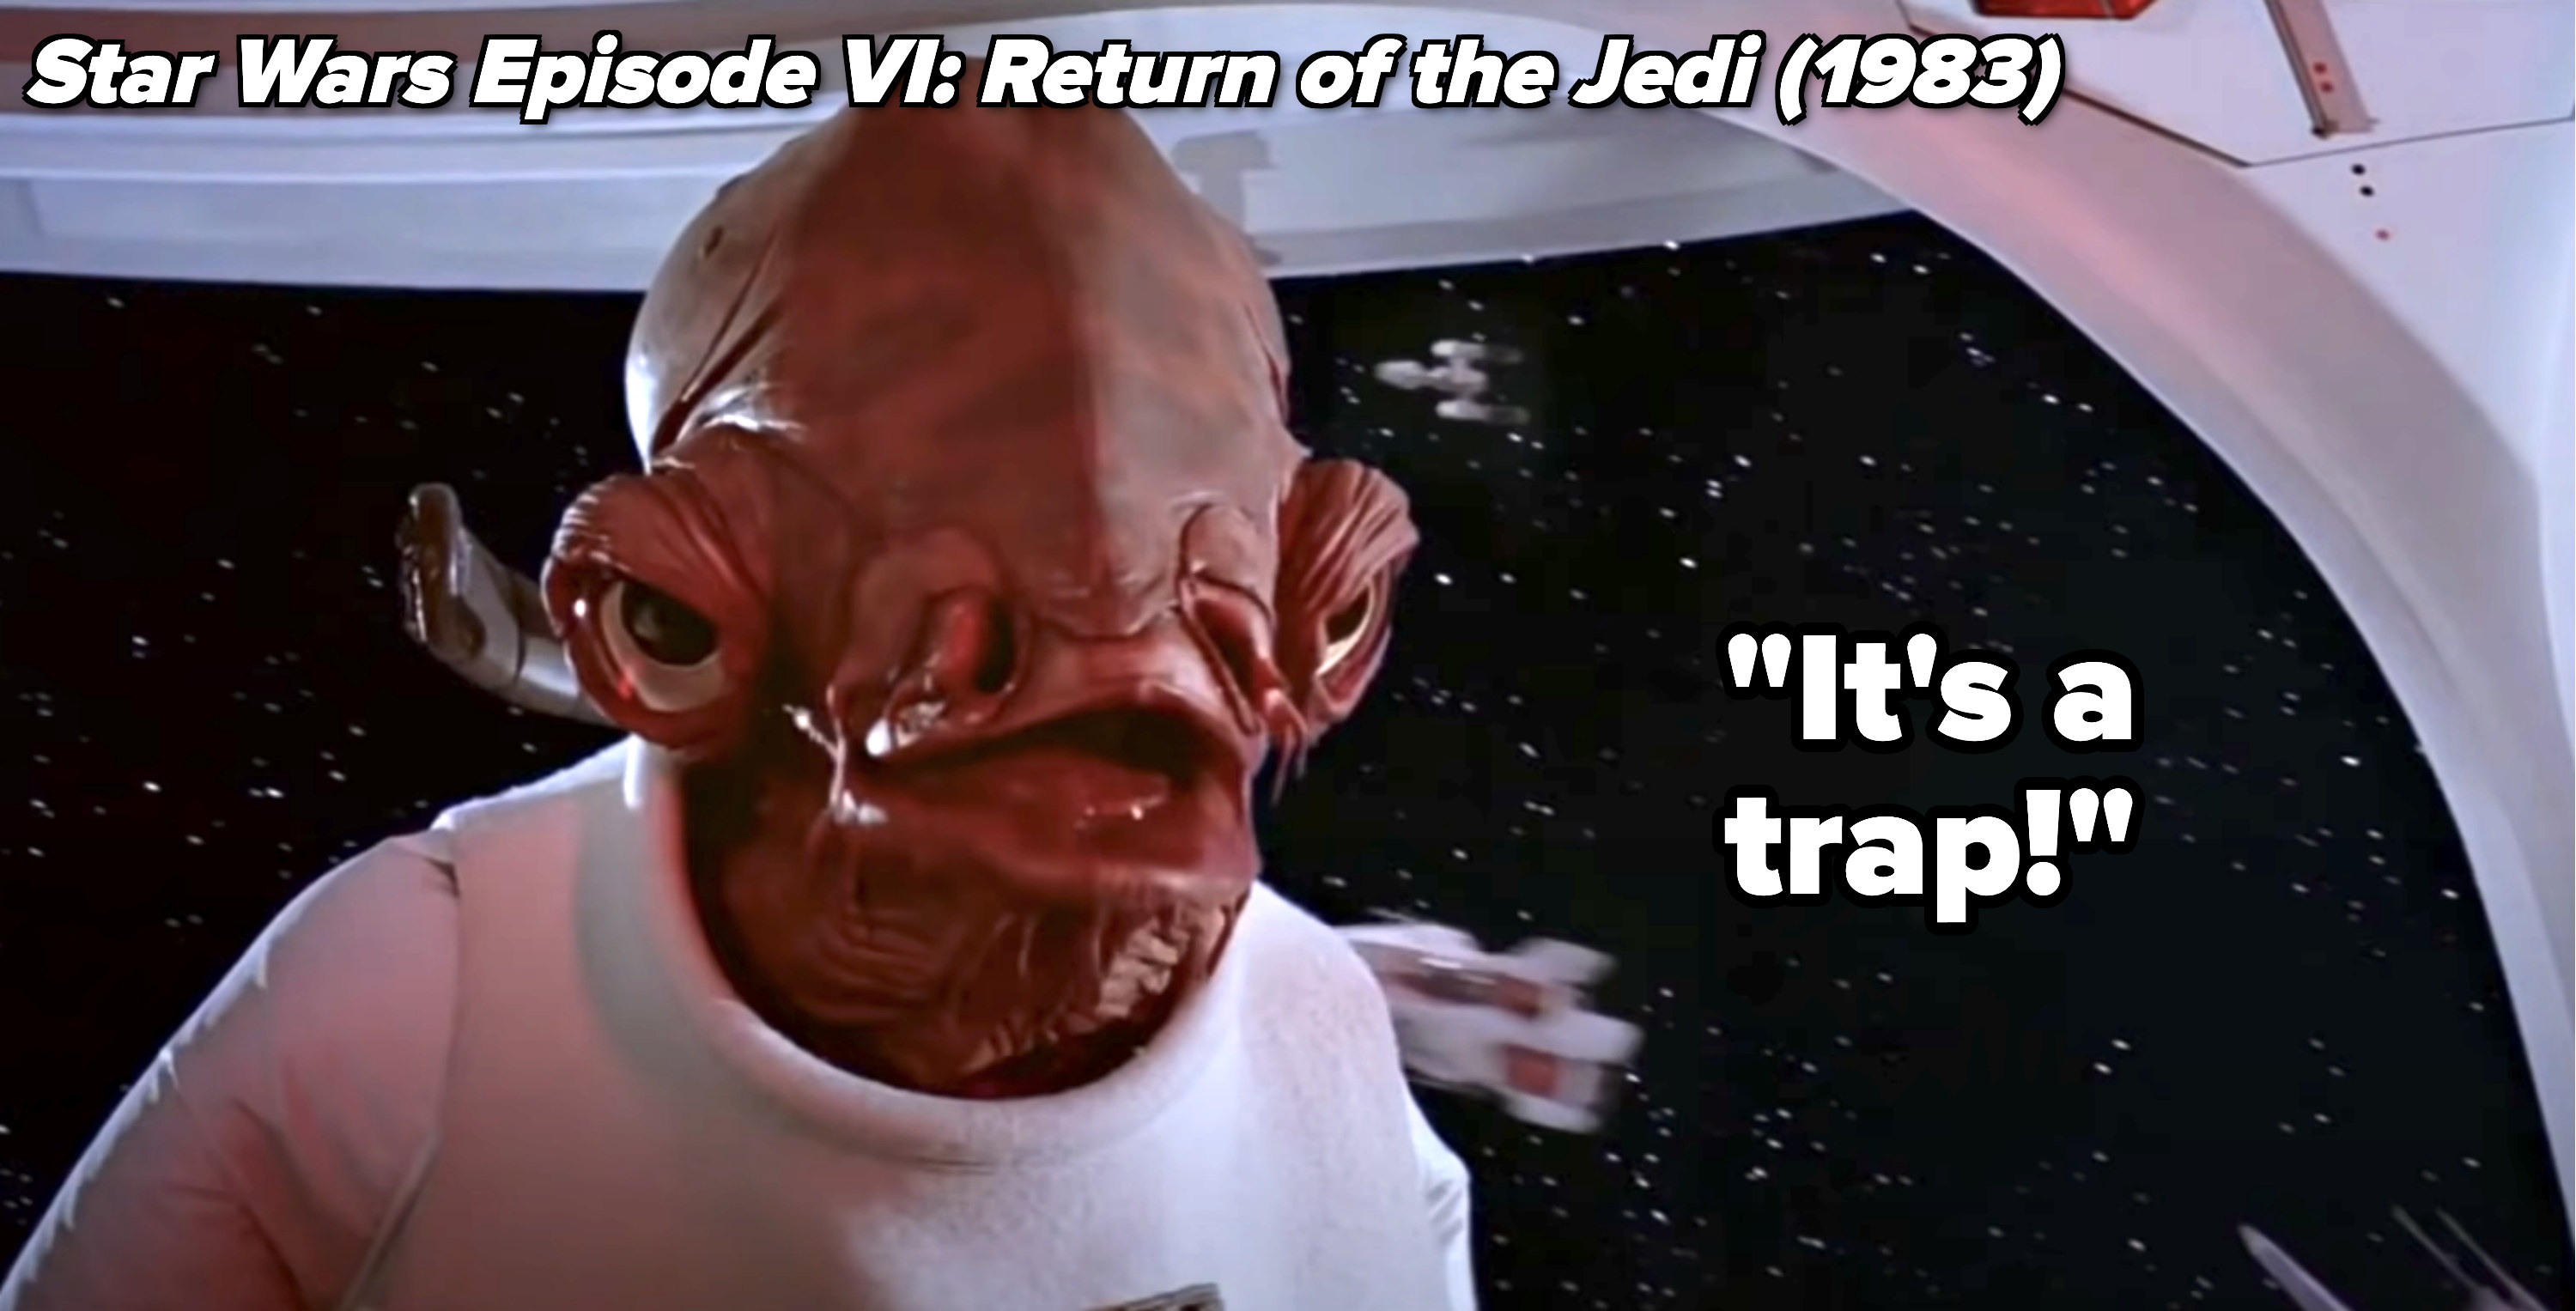 From Return of the Jedi: &quot;It&#x27;s a trap!&quot;